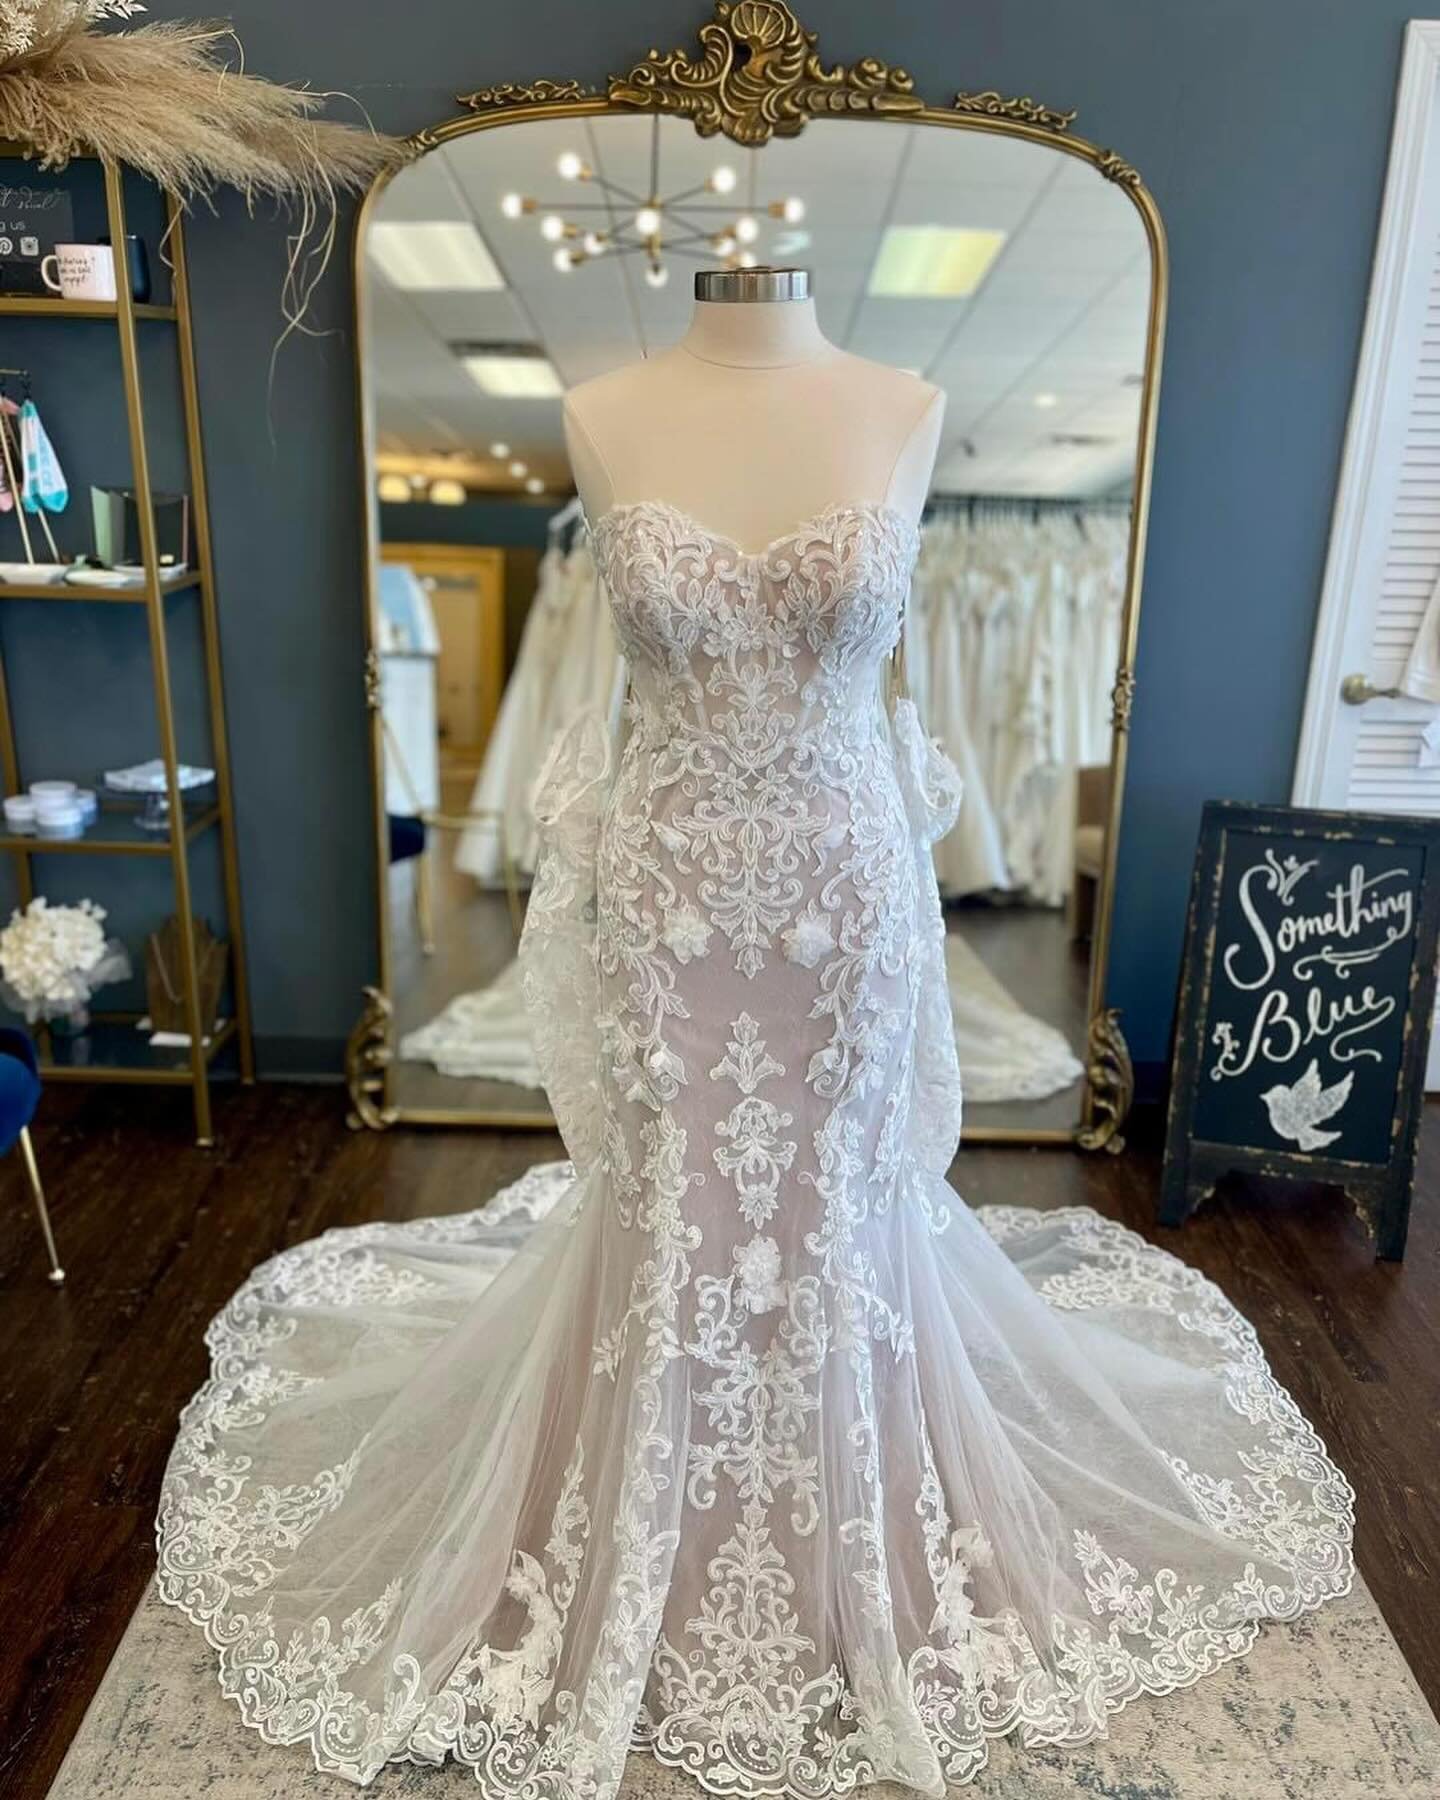 A wedding dress with detached accessories? Yes, please! 🤍

This week&rsquo;s pick for #WeddingGownWednesday is a strapless, fitted gown covered in intricate lace and fun 3D floral details!  We are loving the detached long sleeves that you can throw 